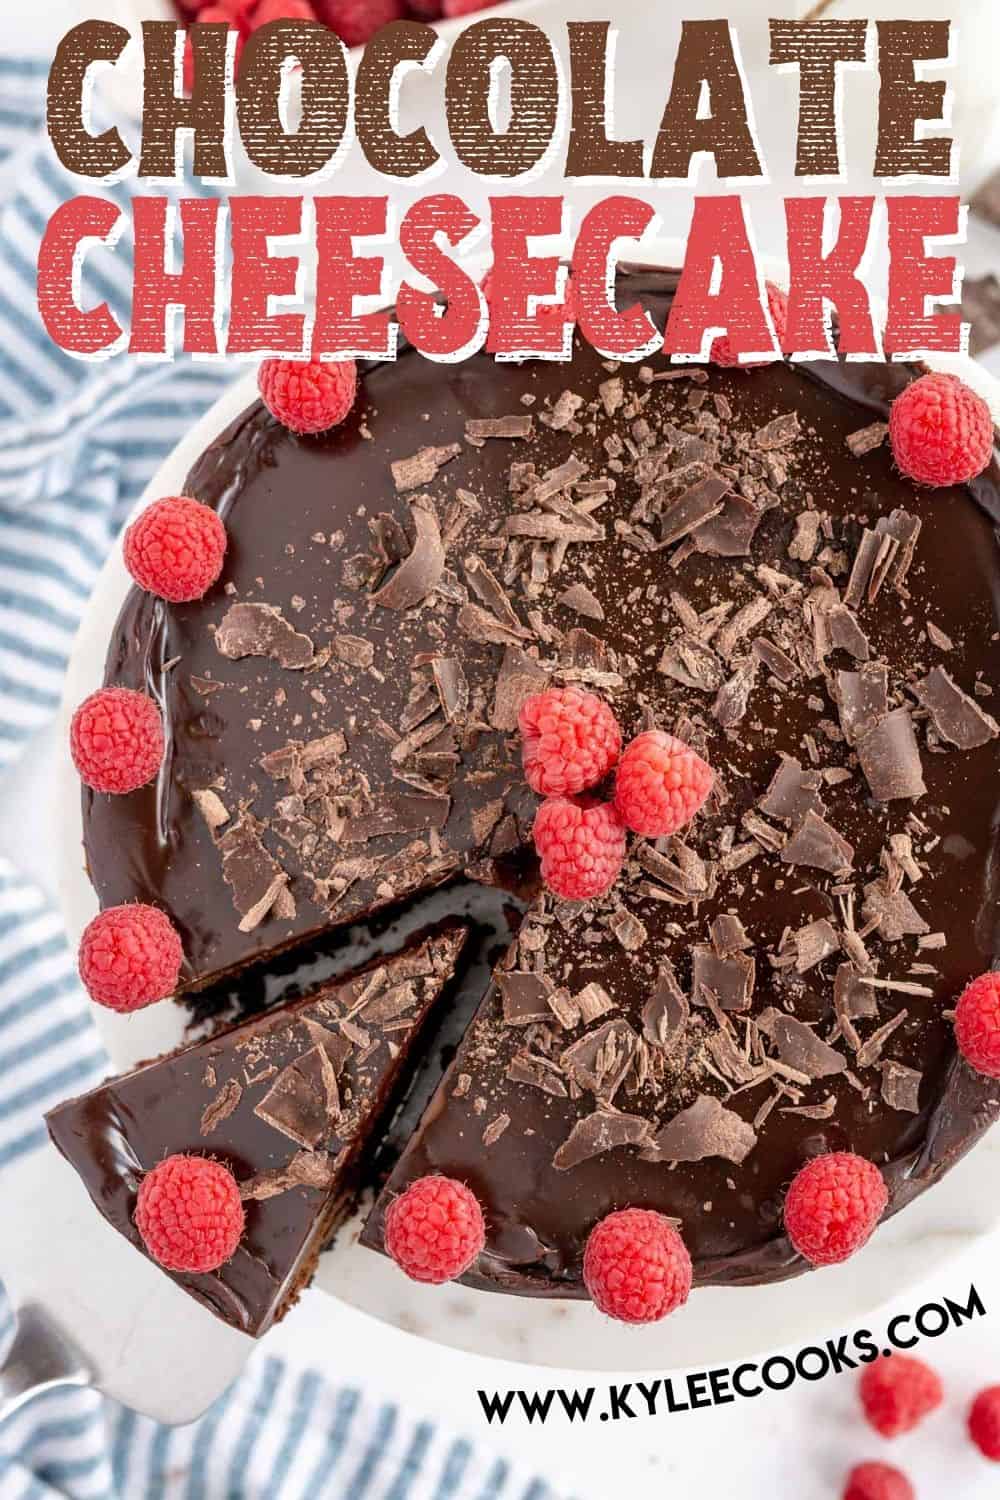 chocolate cheesecake sliced, with recipe name overlaid in text